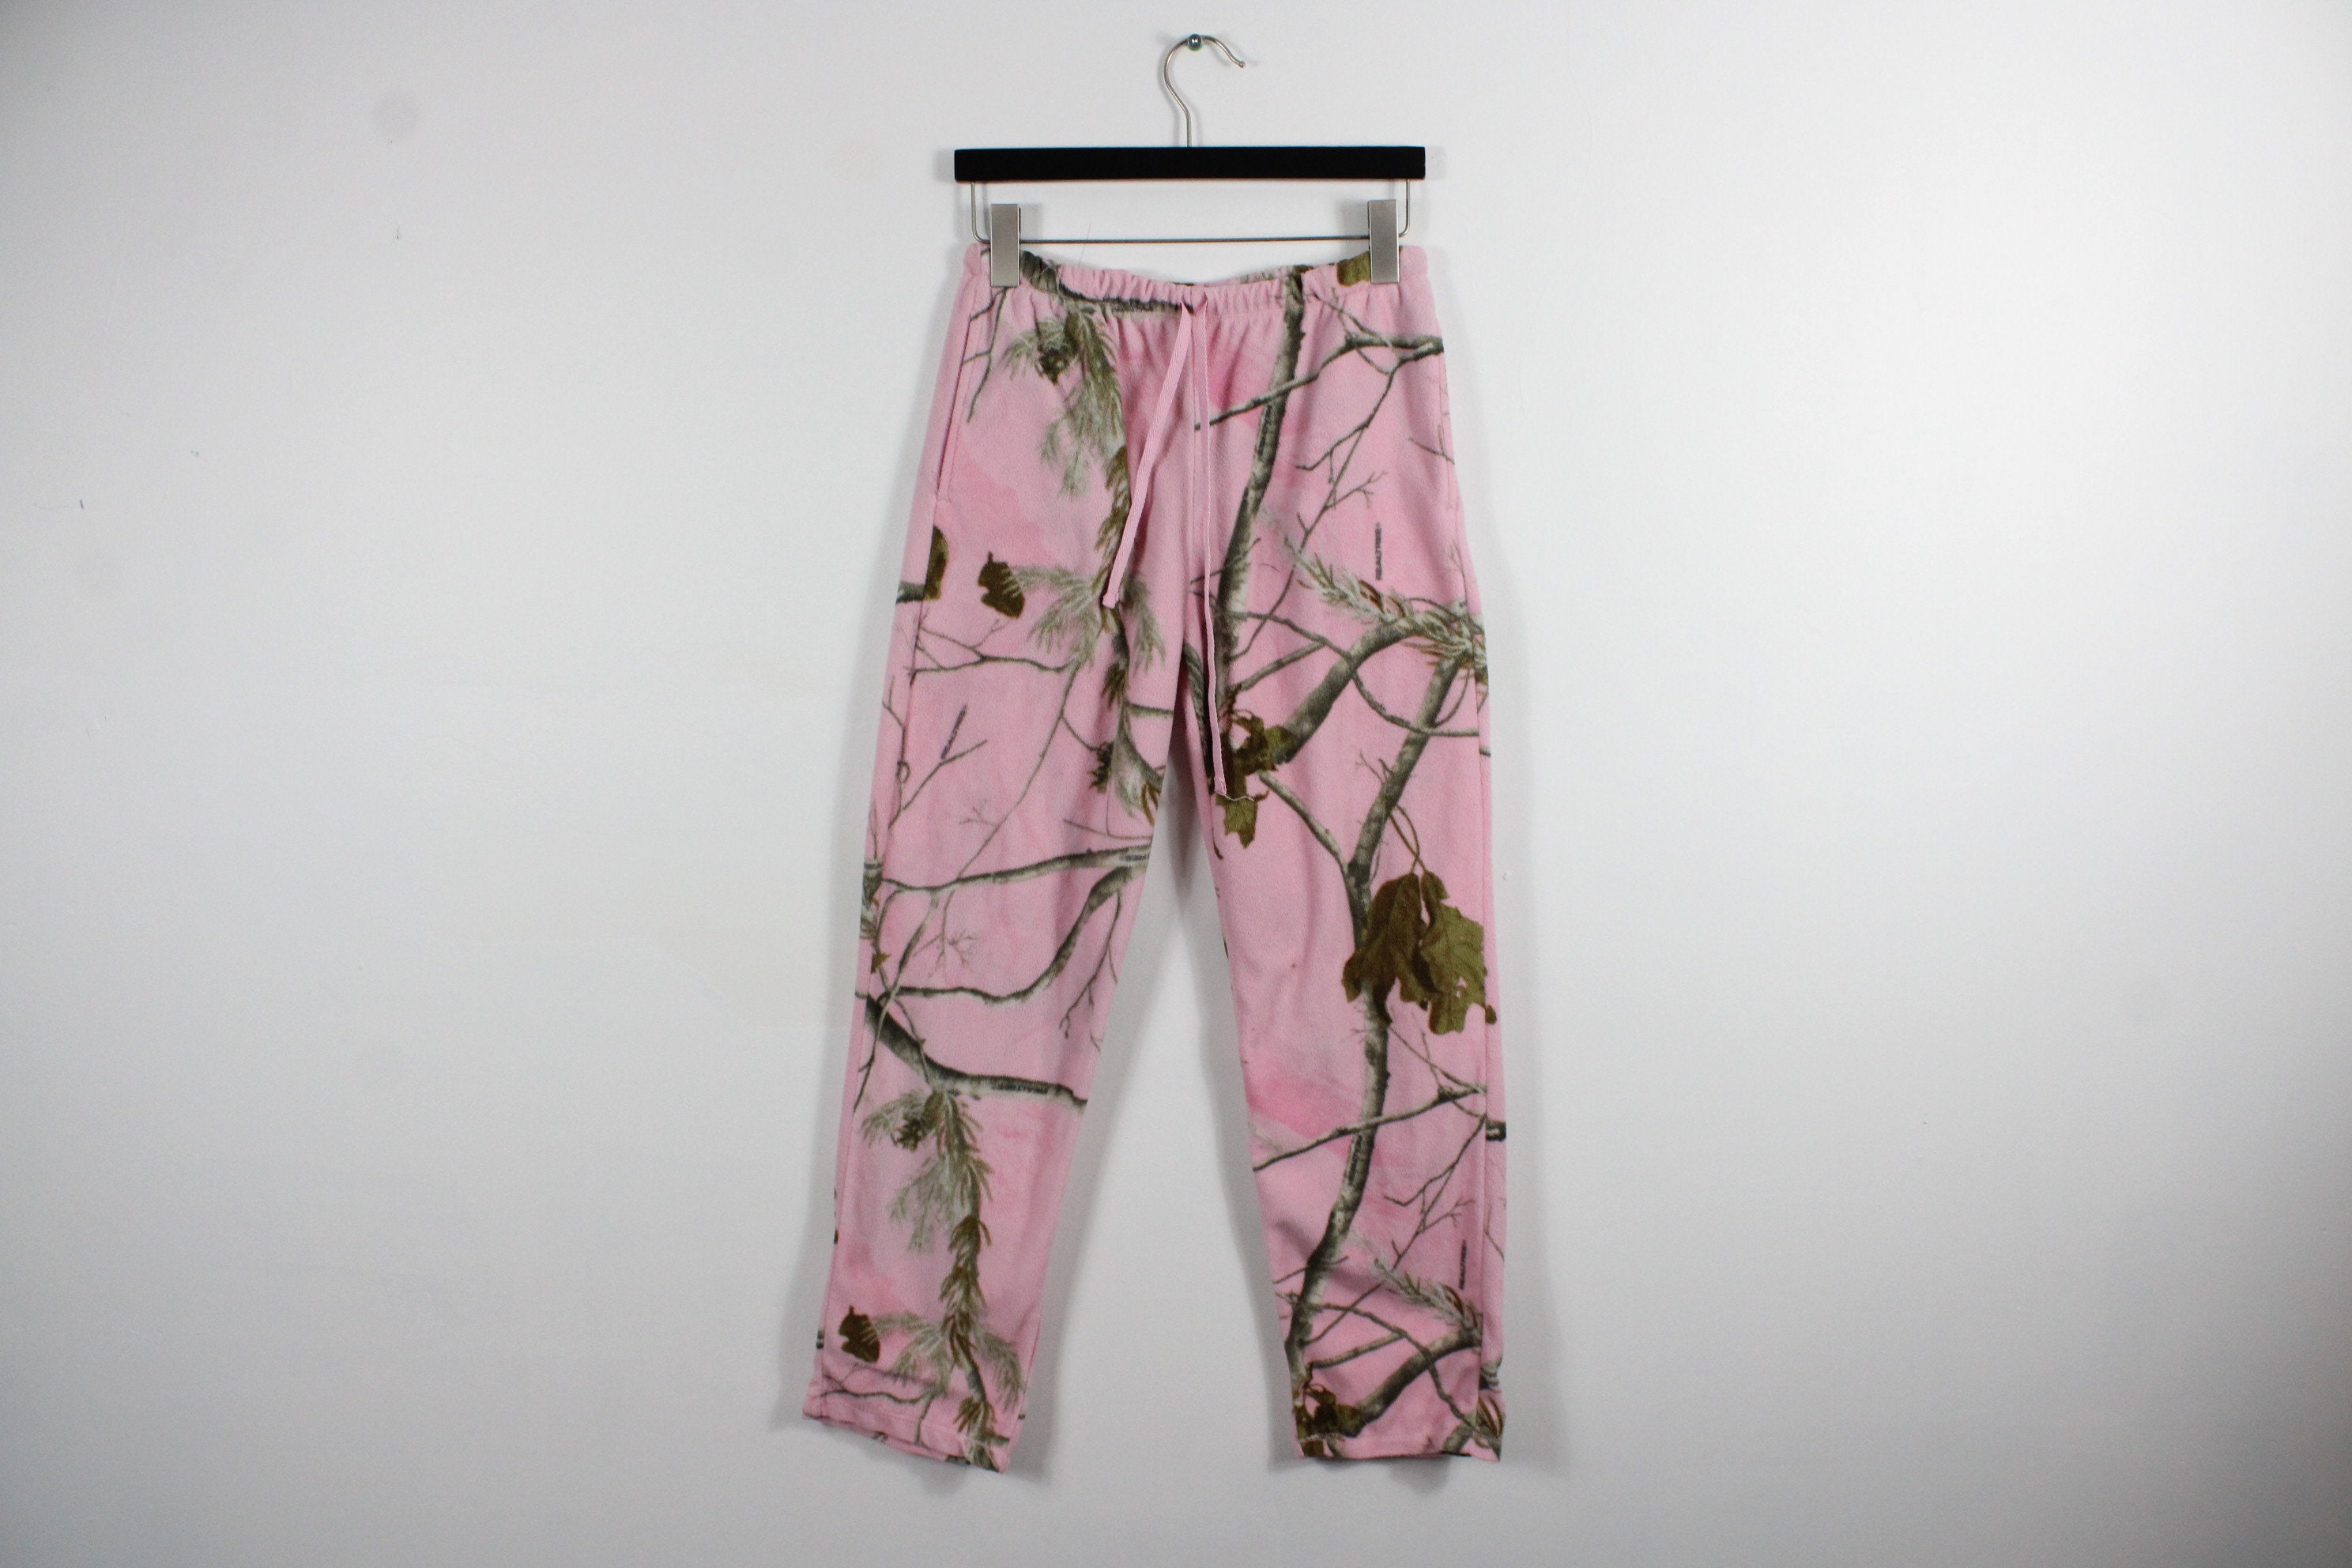 Sexy Miss Ladies Camouflage Cargo Capri Pants Belt XS S M L Pink Army  Military